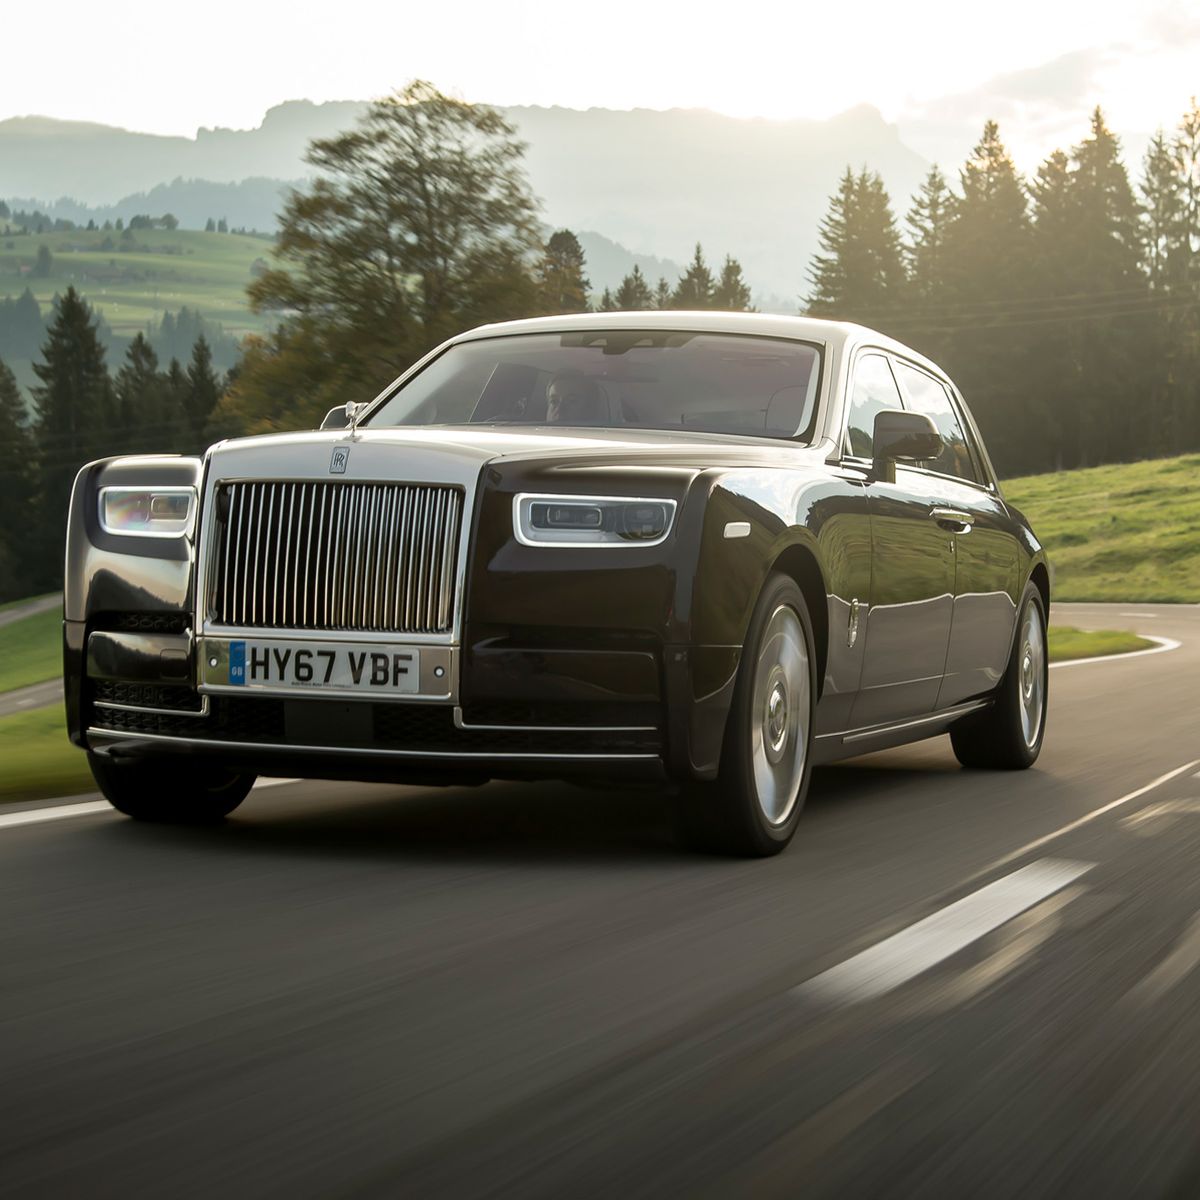 Rolls-Royce New Car Reviews, News, Models & Prices - Drive